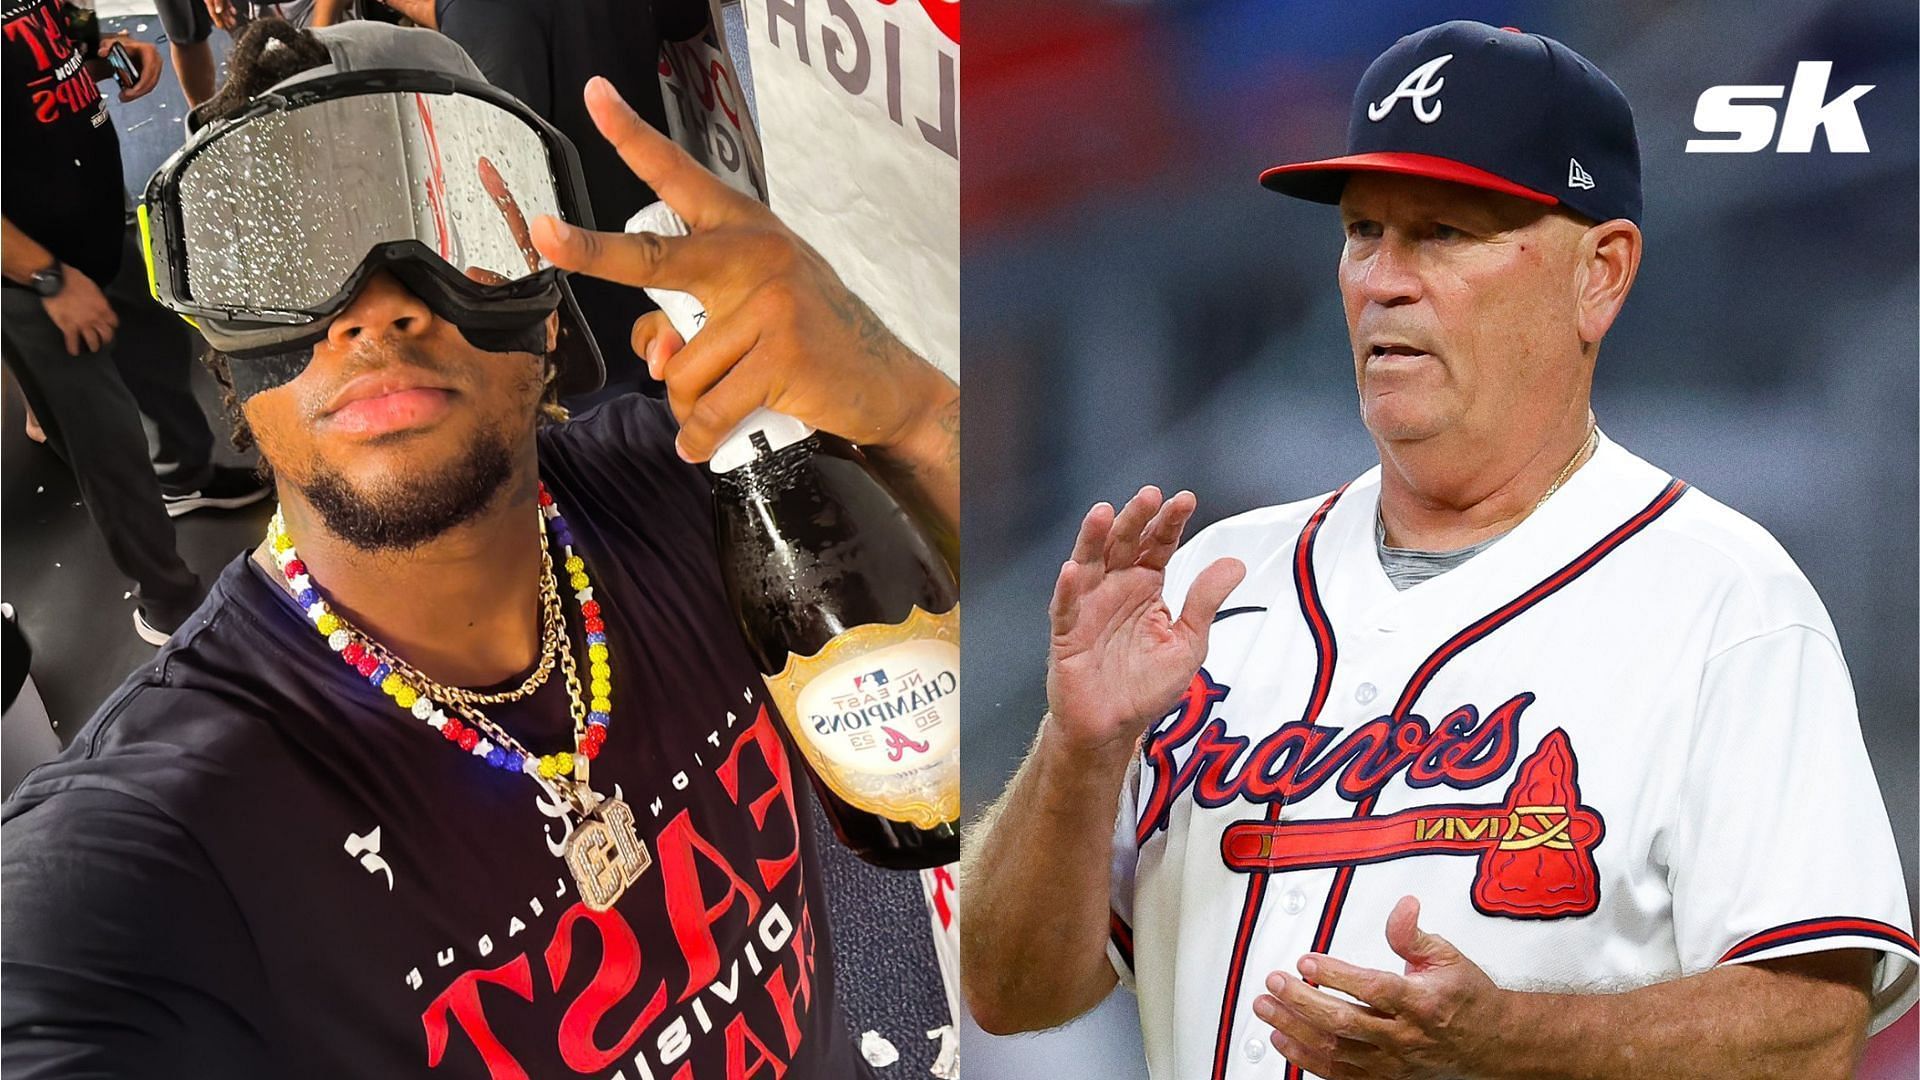 Atlanta Braves manager Brian Snitker raised some eyebrows by telling Ronald Acuna Jr. that he will get to finally play in the World Series